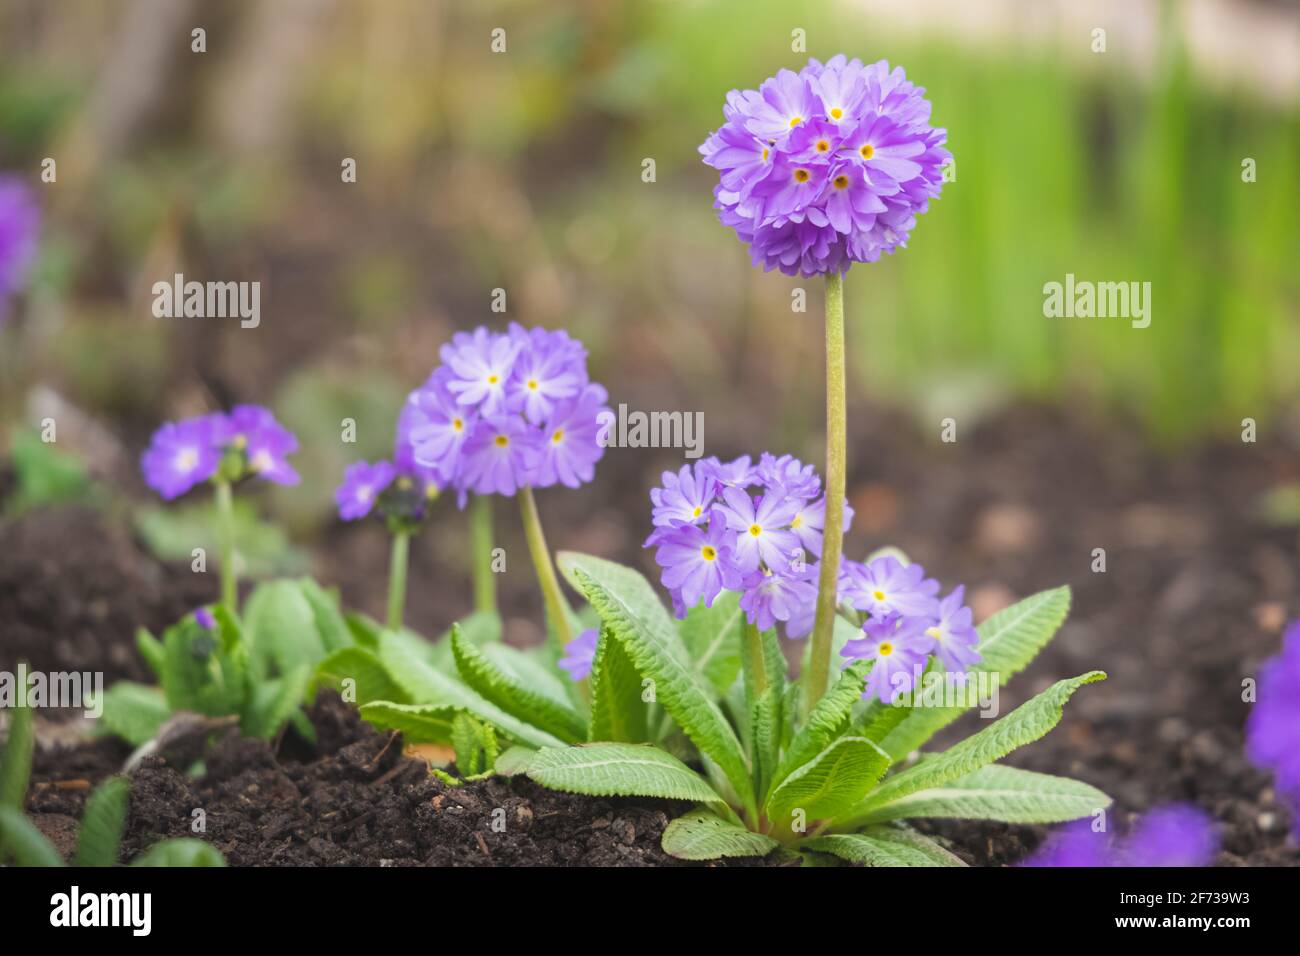 Selective focus close-up detail of a delicate purple Primula denticulata flower in soil in Spring. Stock Photo